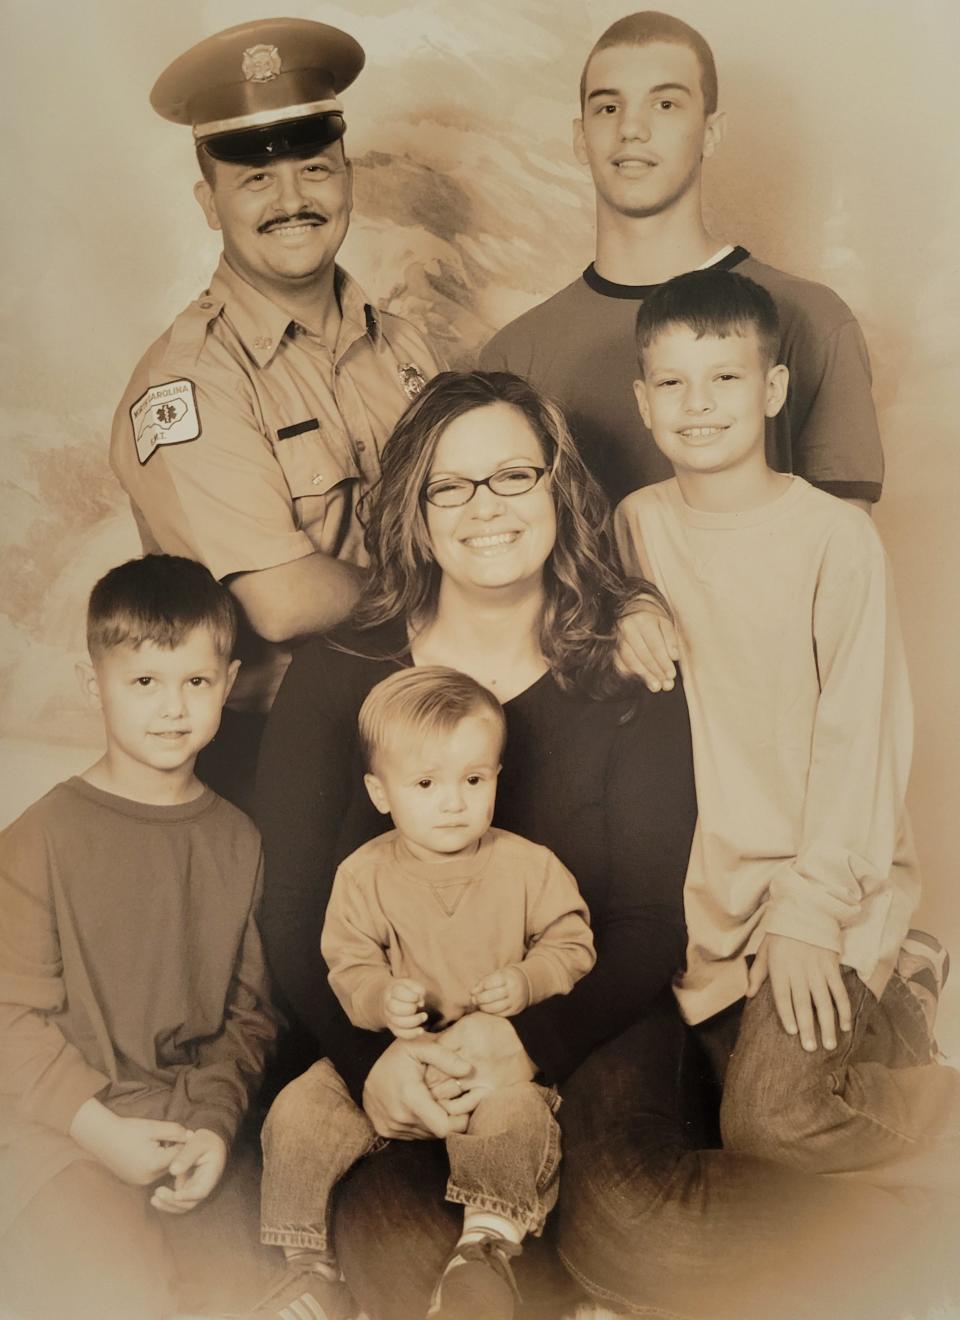 U.S. Army Sergeant Roger Leeroy Adams Jr. and his wife Teresa with their four sons.